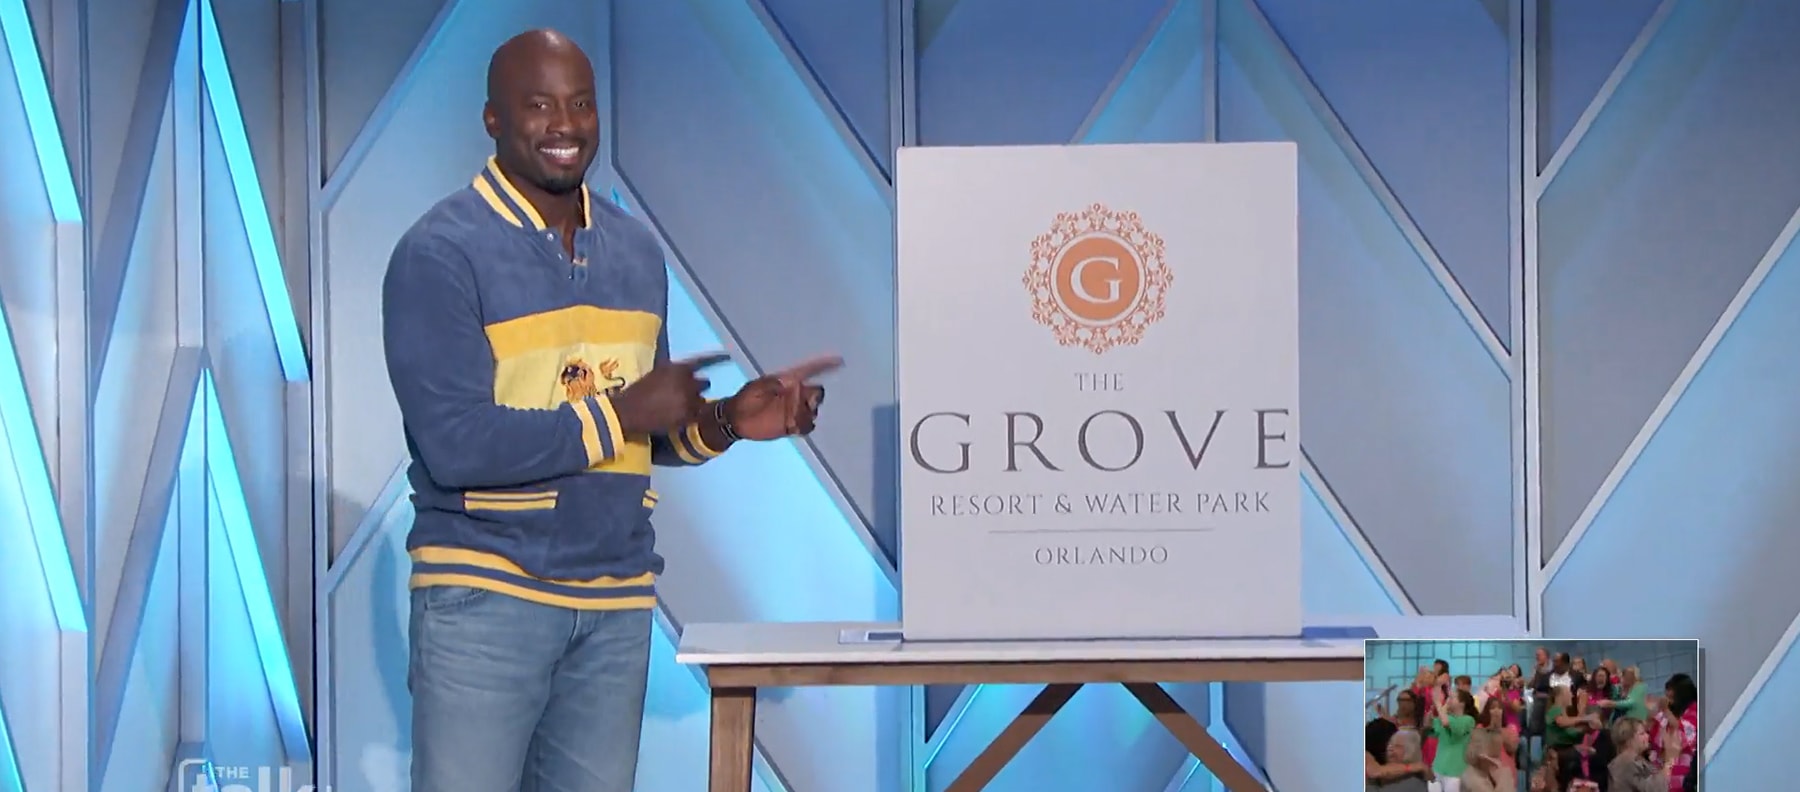 The Grove Resort & Water Park Orlando on The Talk show